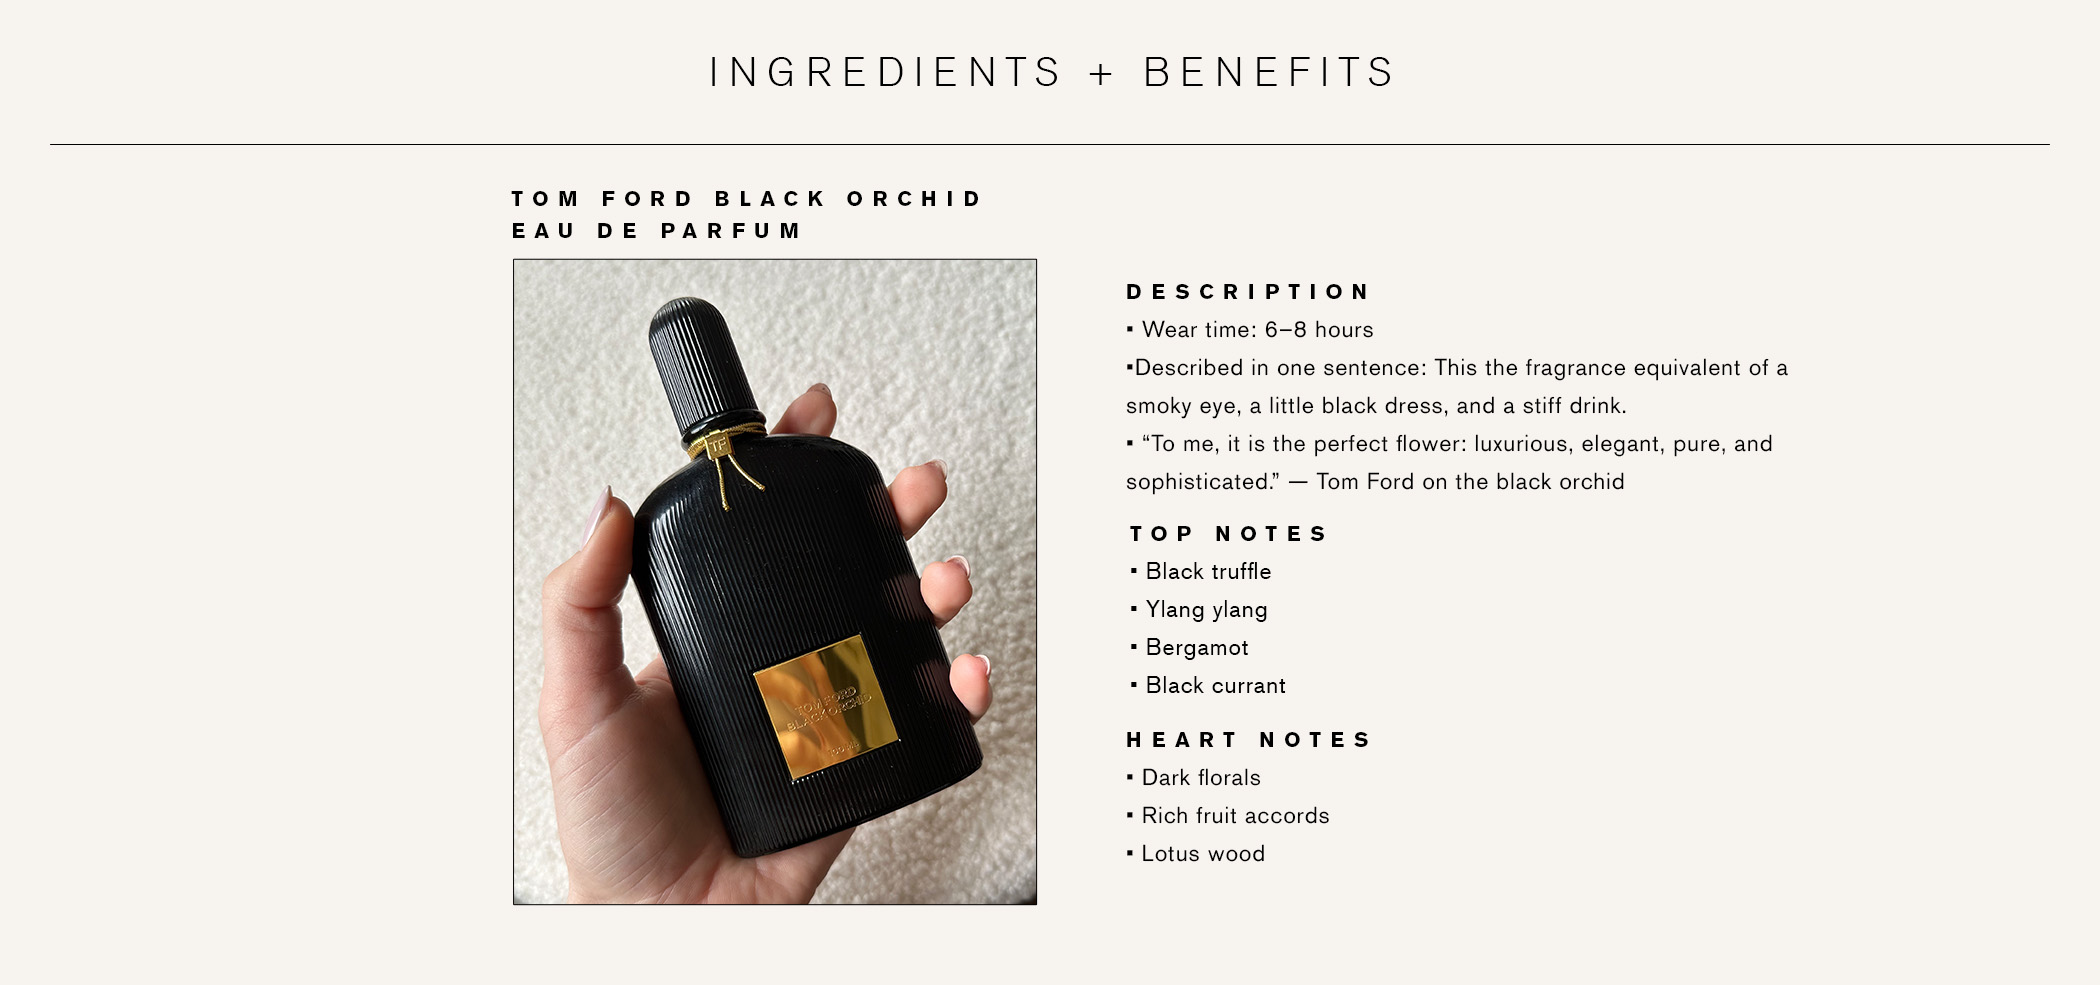 Arriba 70+ imagen tom ford black orchid gold review - Abzlocal.mx